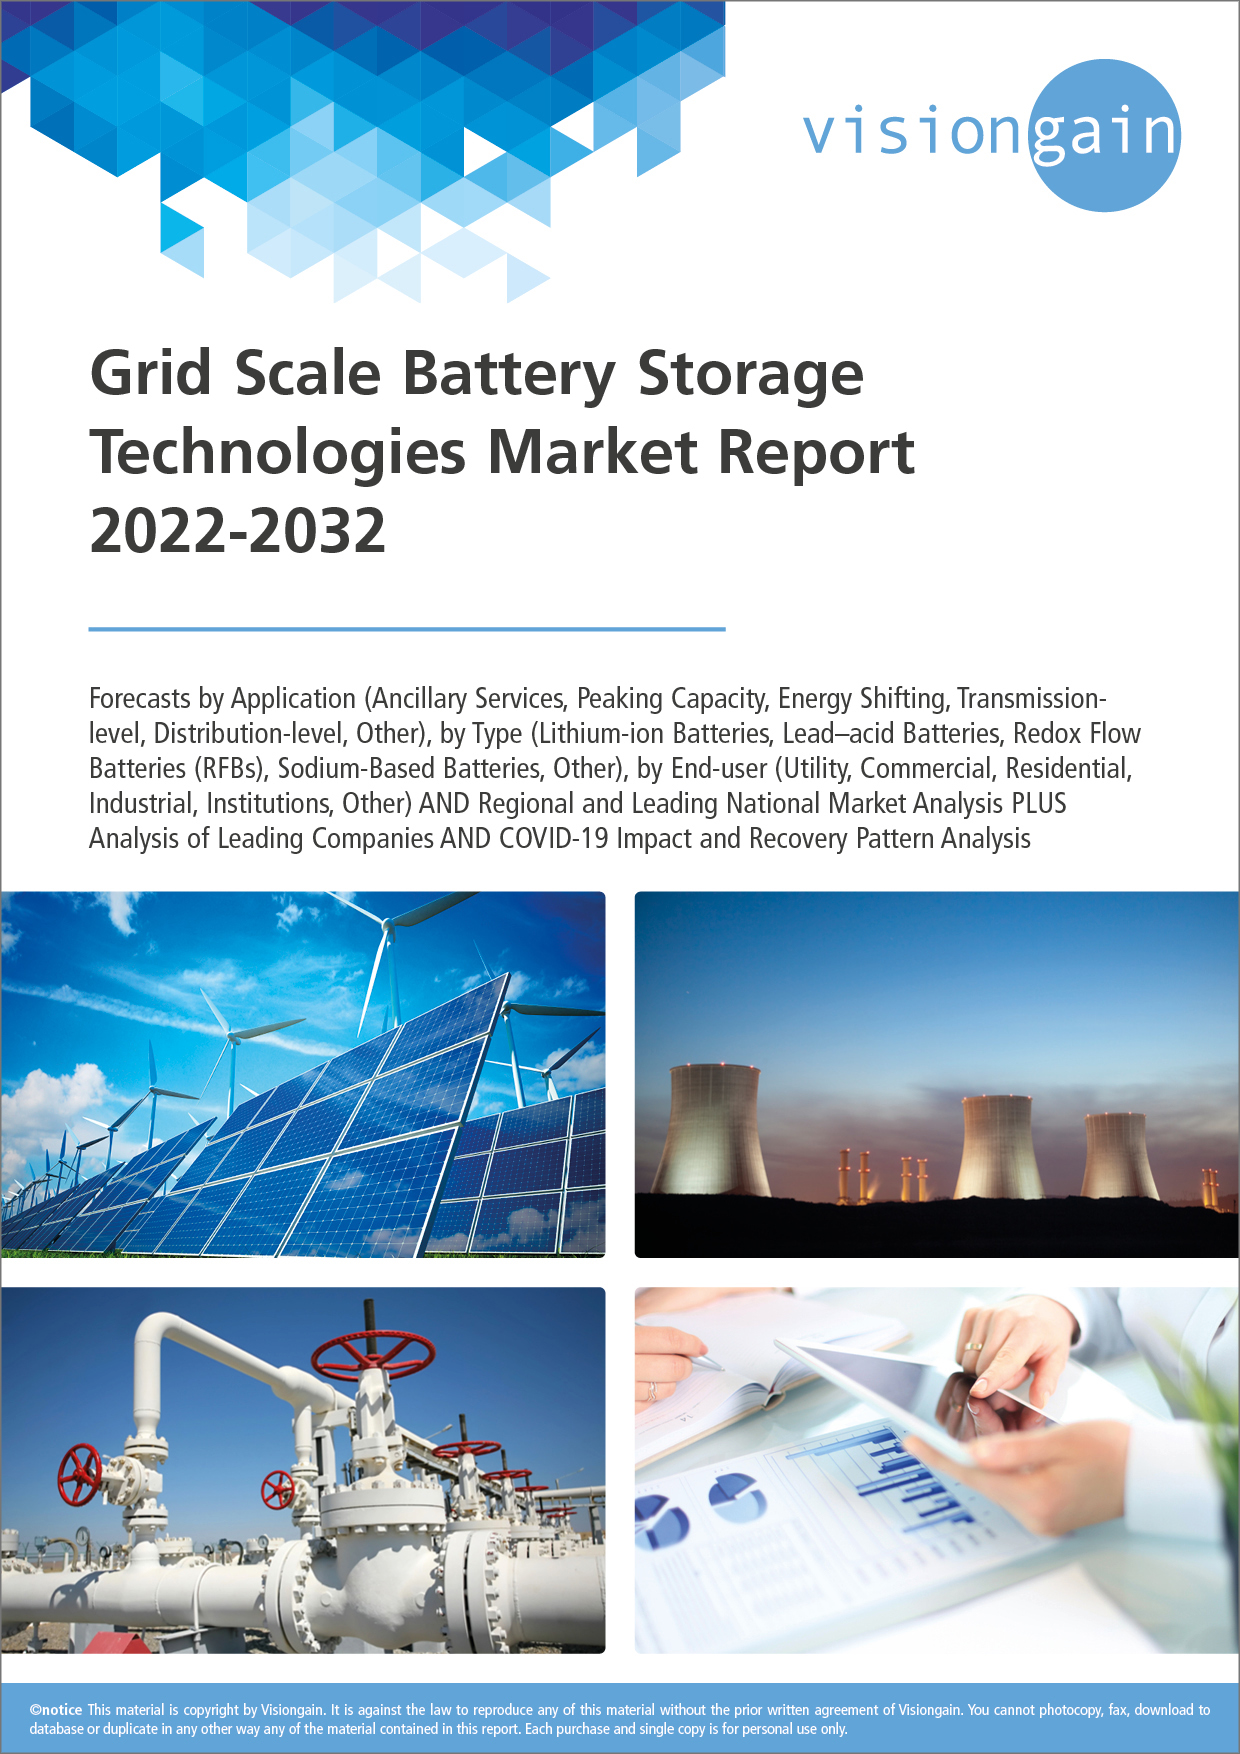 https://www.visiongain.com/wp-content/uploads/2022/09/Cover-Grid-Scale-Battery-Storage-Technologies-Market-Report-2022-2032.jpg